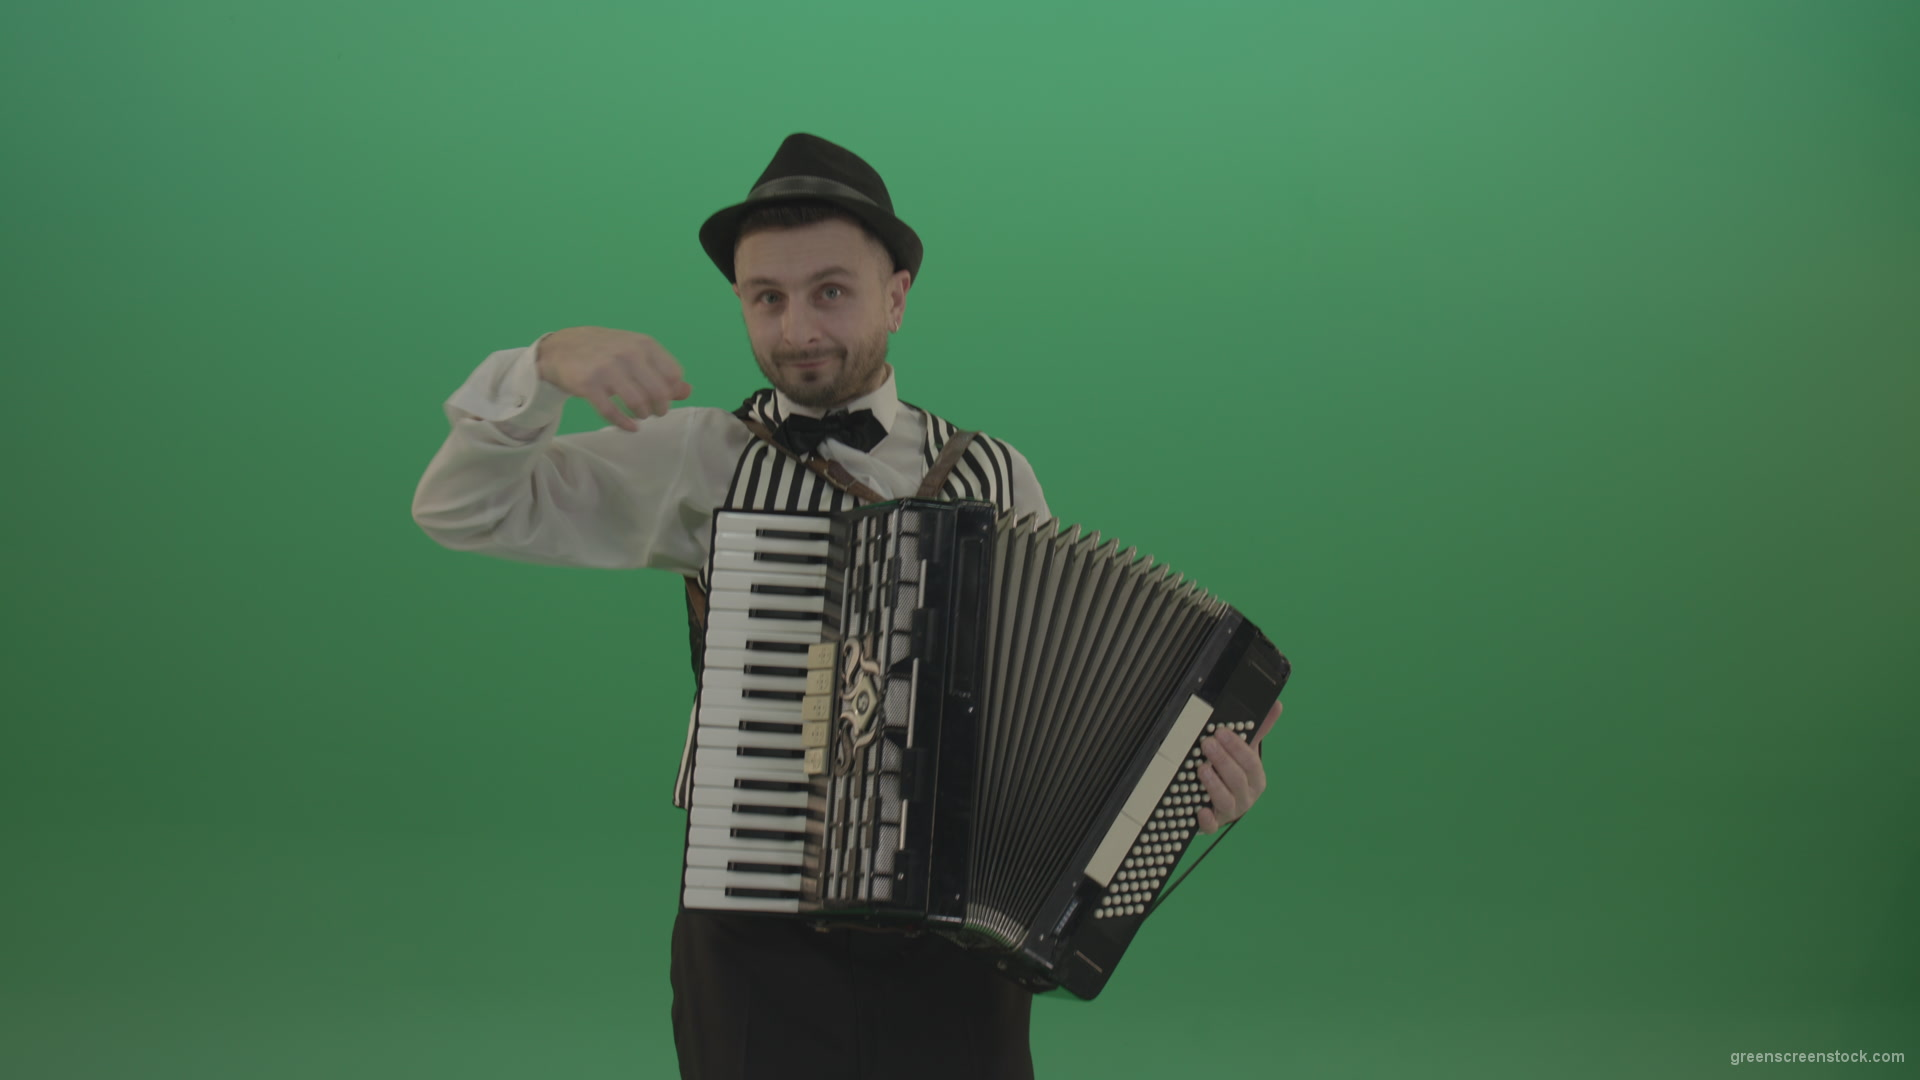 Virtuoso-player-man-with-Accordion-isolated-on-green-screen-in-front-view-1_004 Green Screen Stock